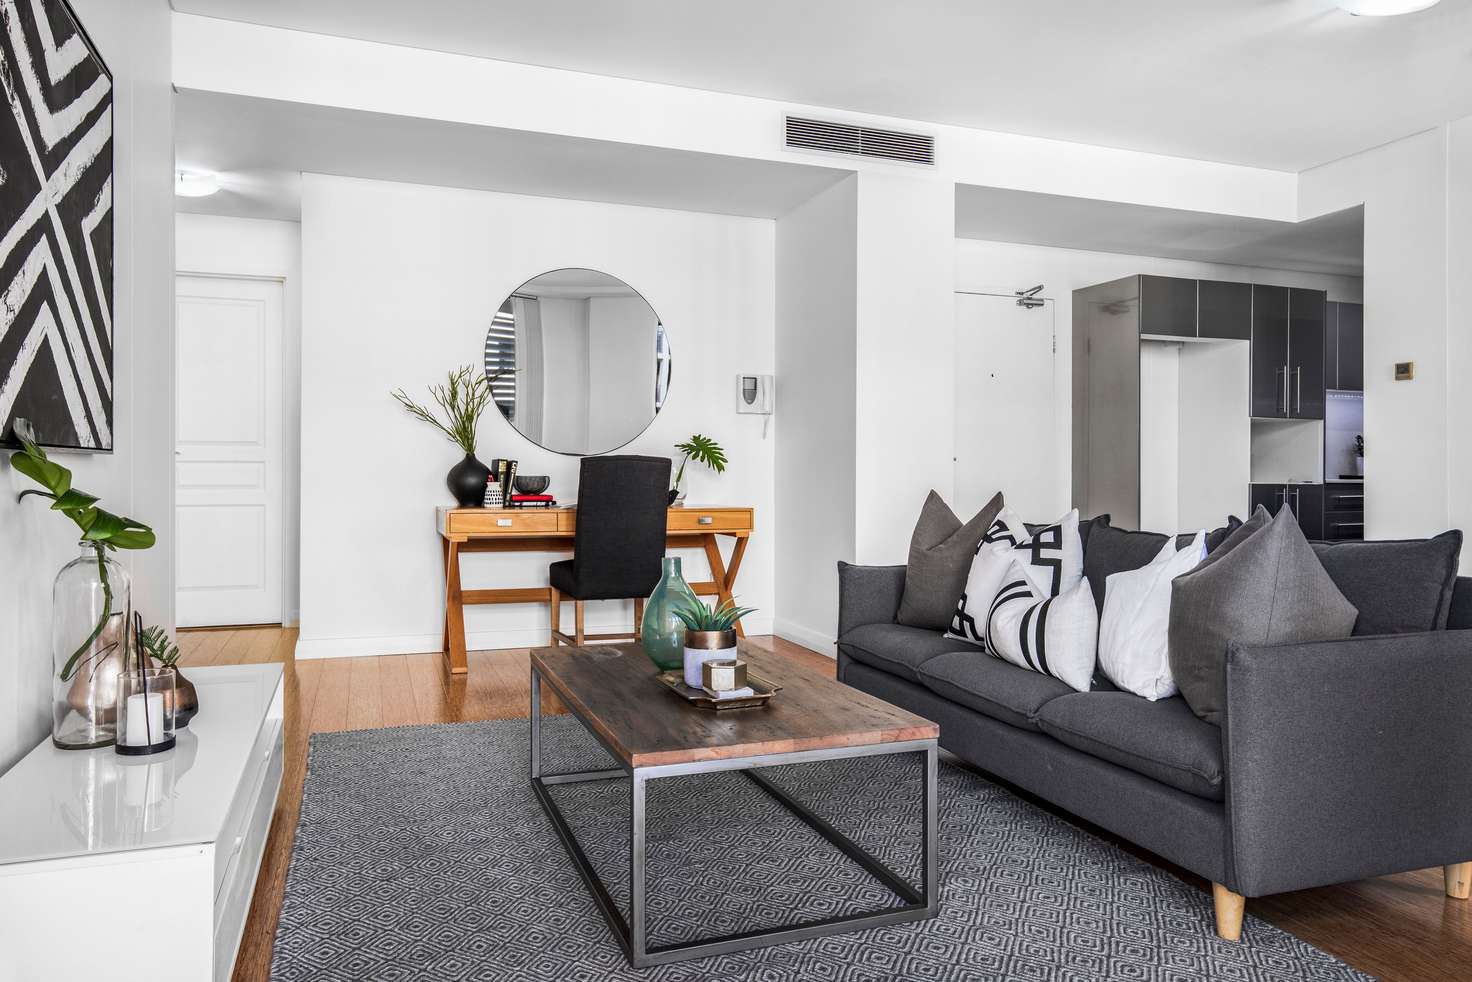 Main view of Homely unit listing, 5213/84 Belmore Street, Ryde NSW 2112